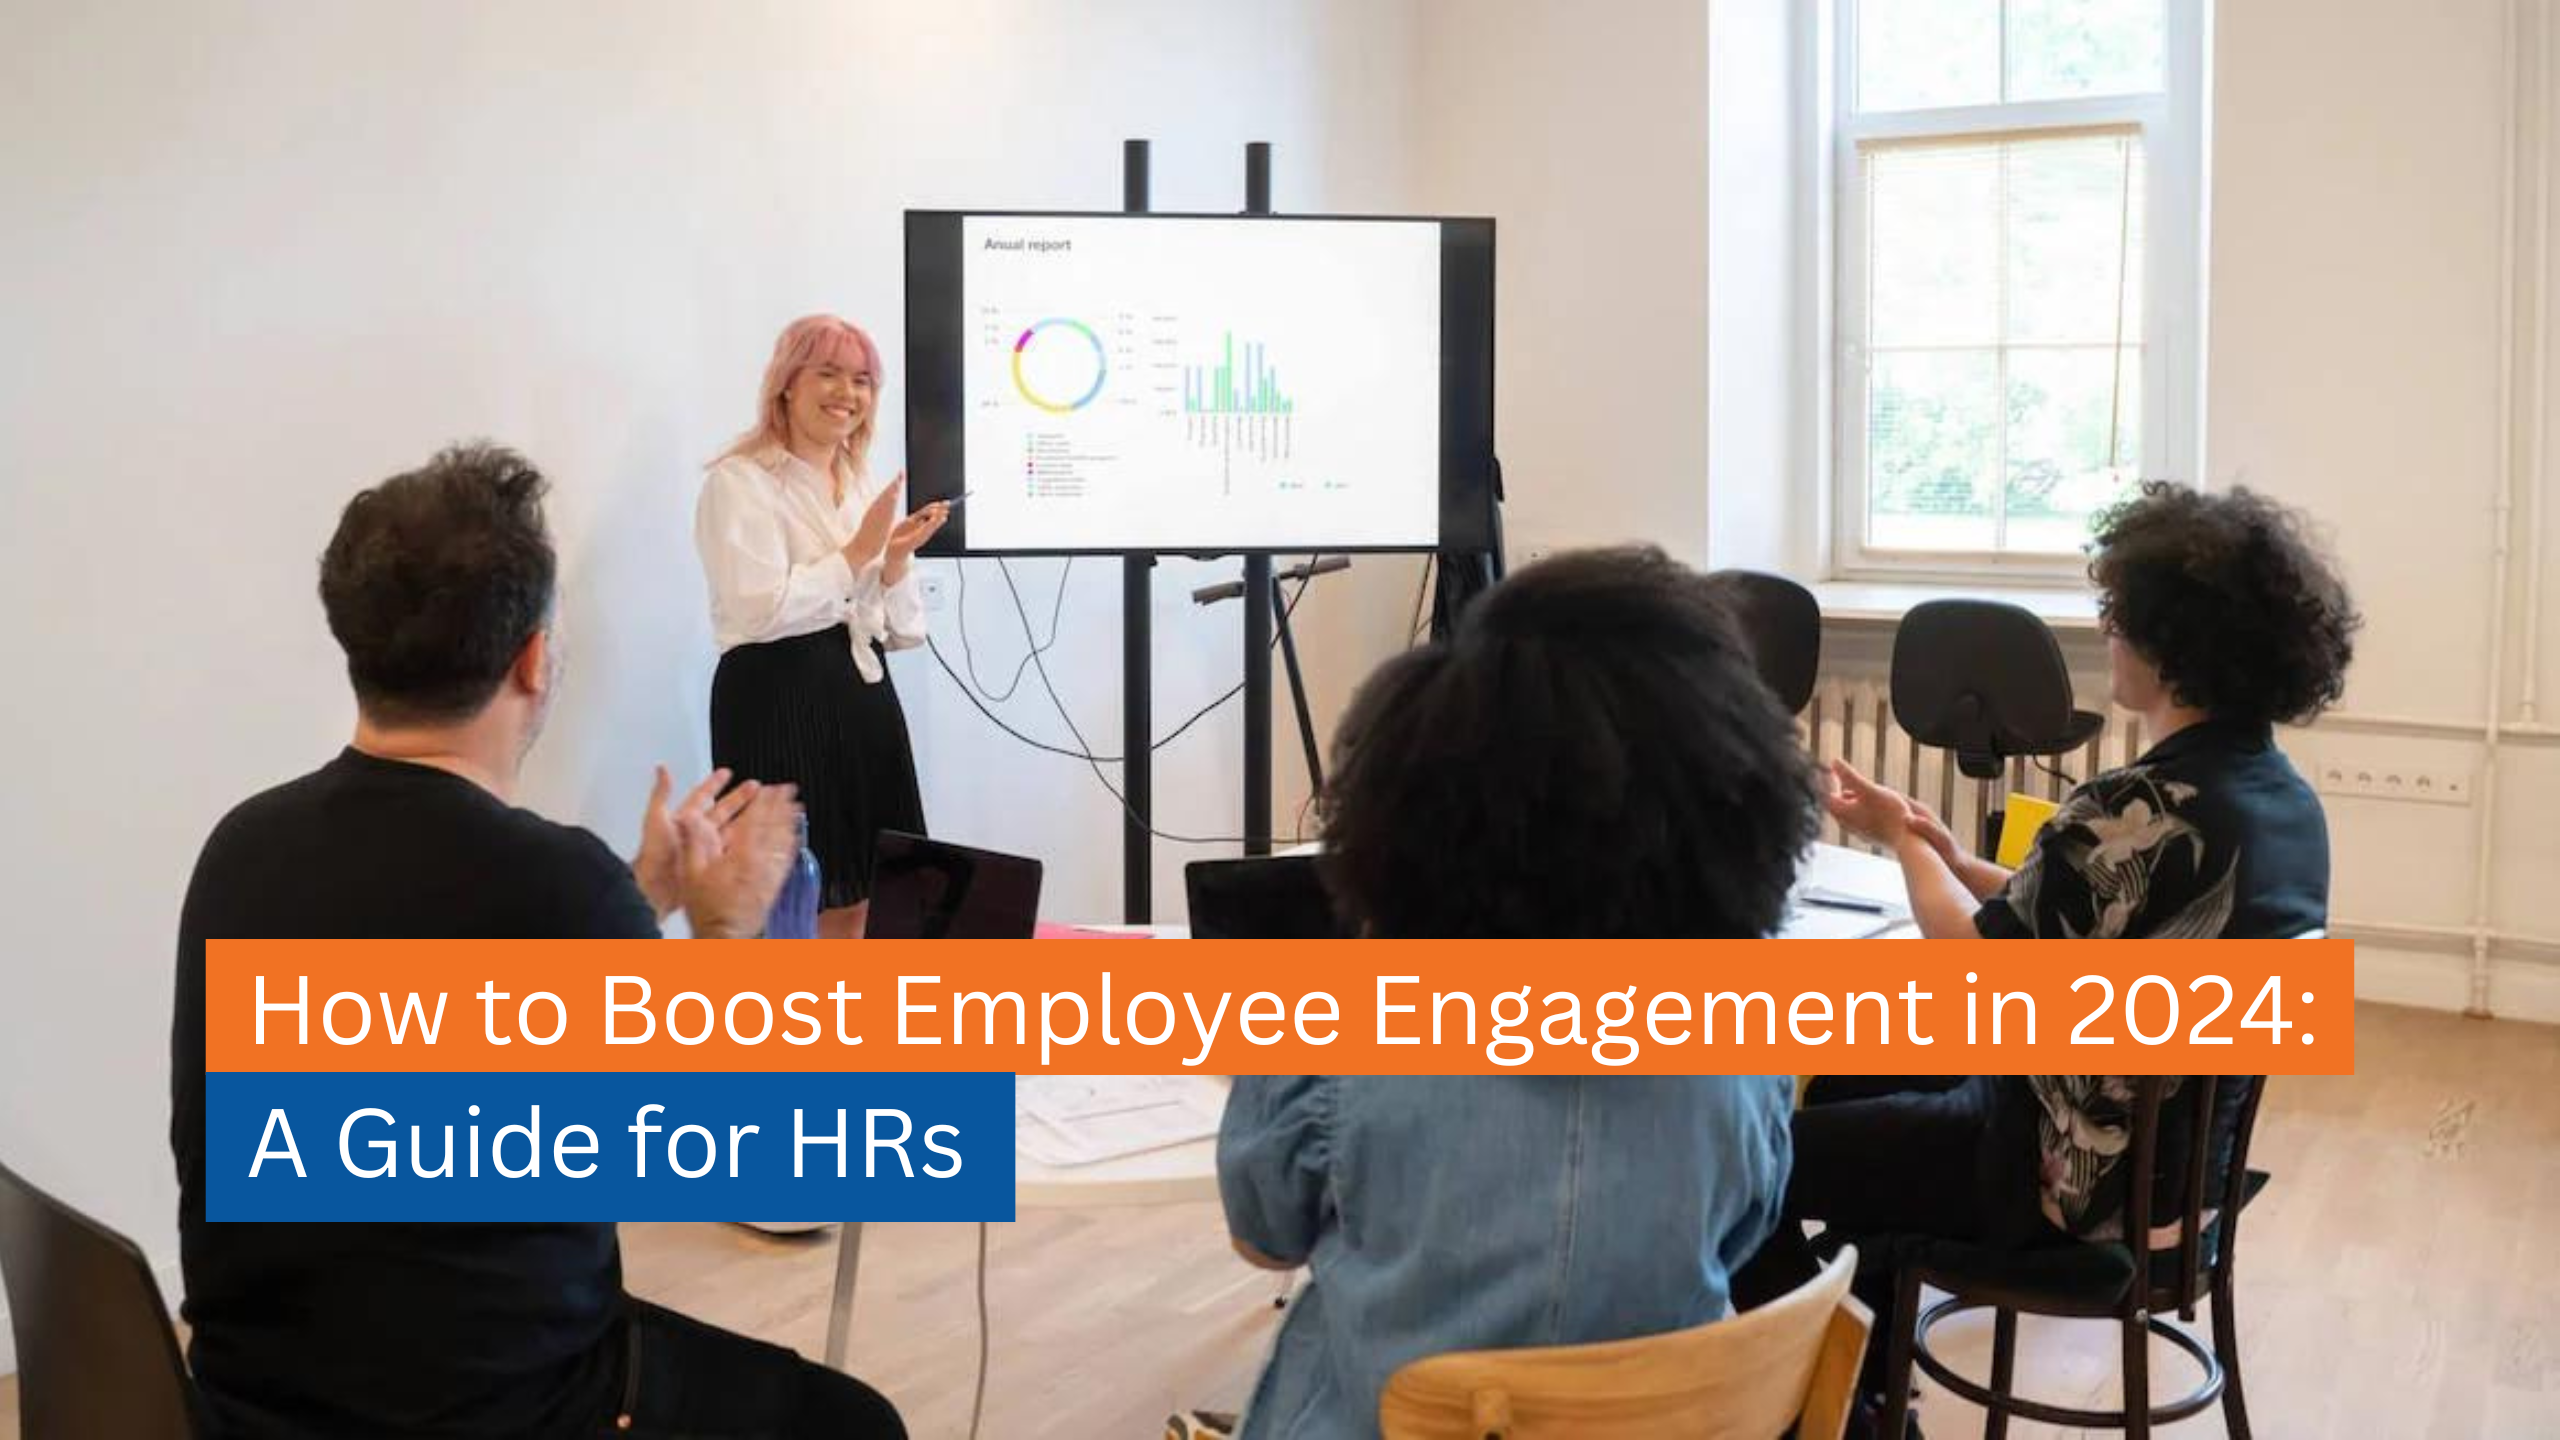 How to Boost Employee Engagement in 2024: A Guide for HRs